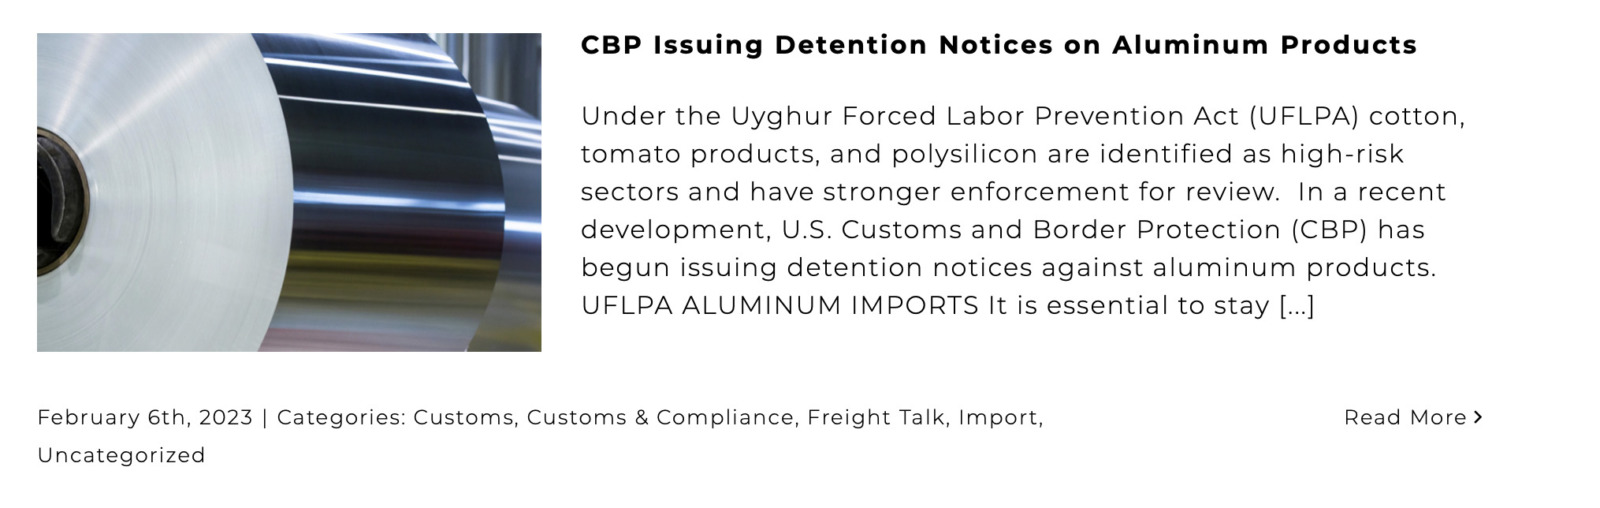 CBP Issuing Detention Notices on Aluminum Products